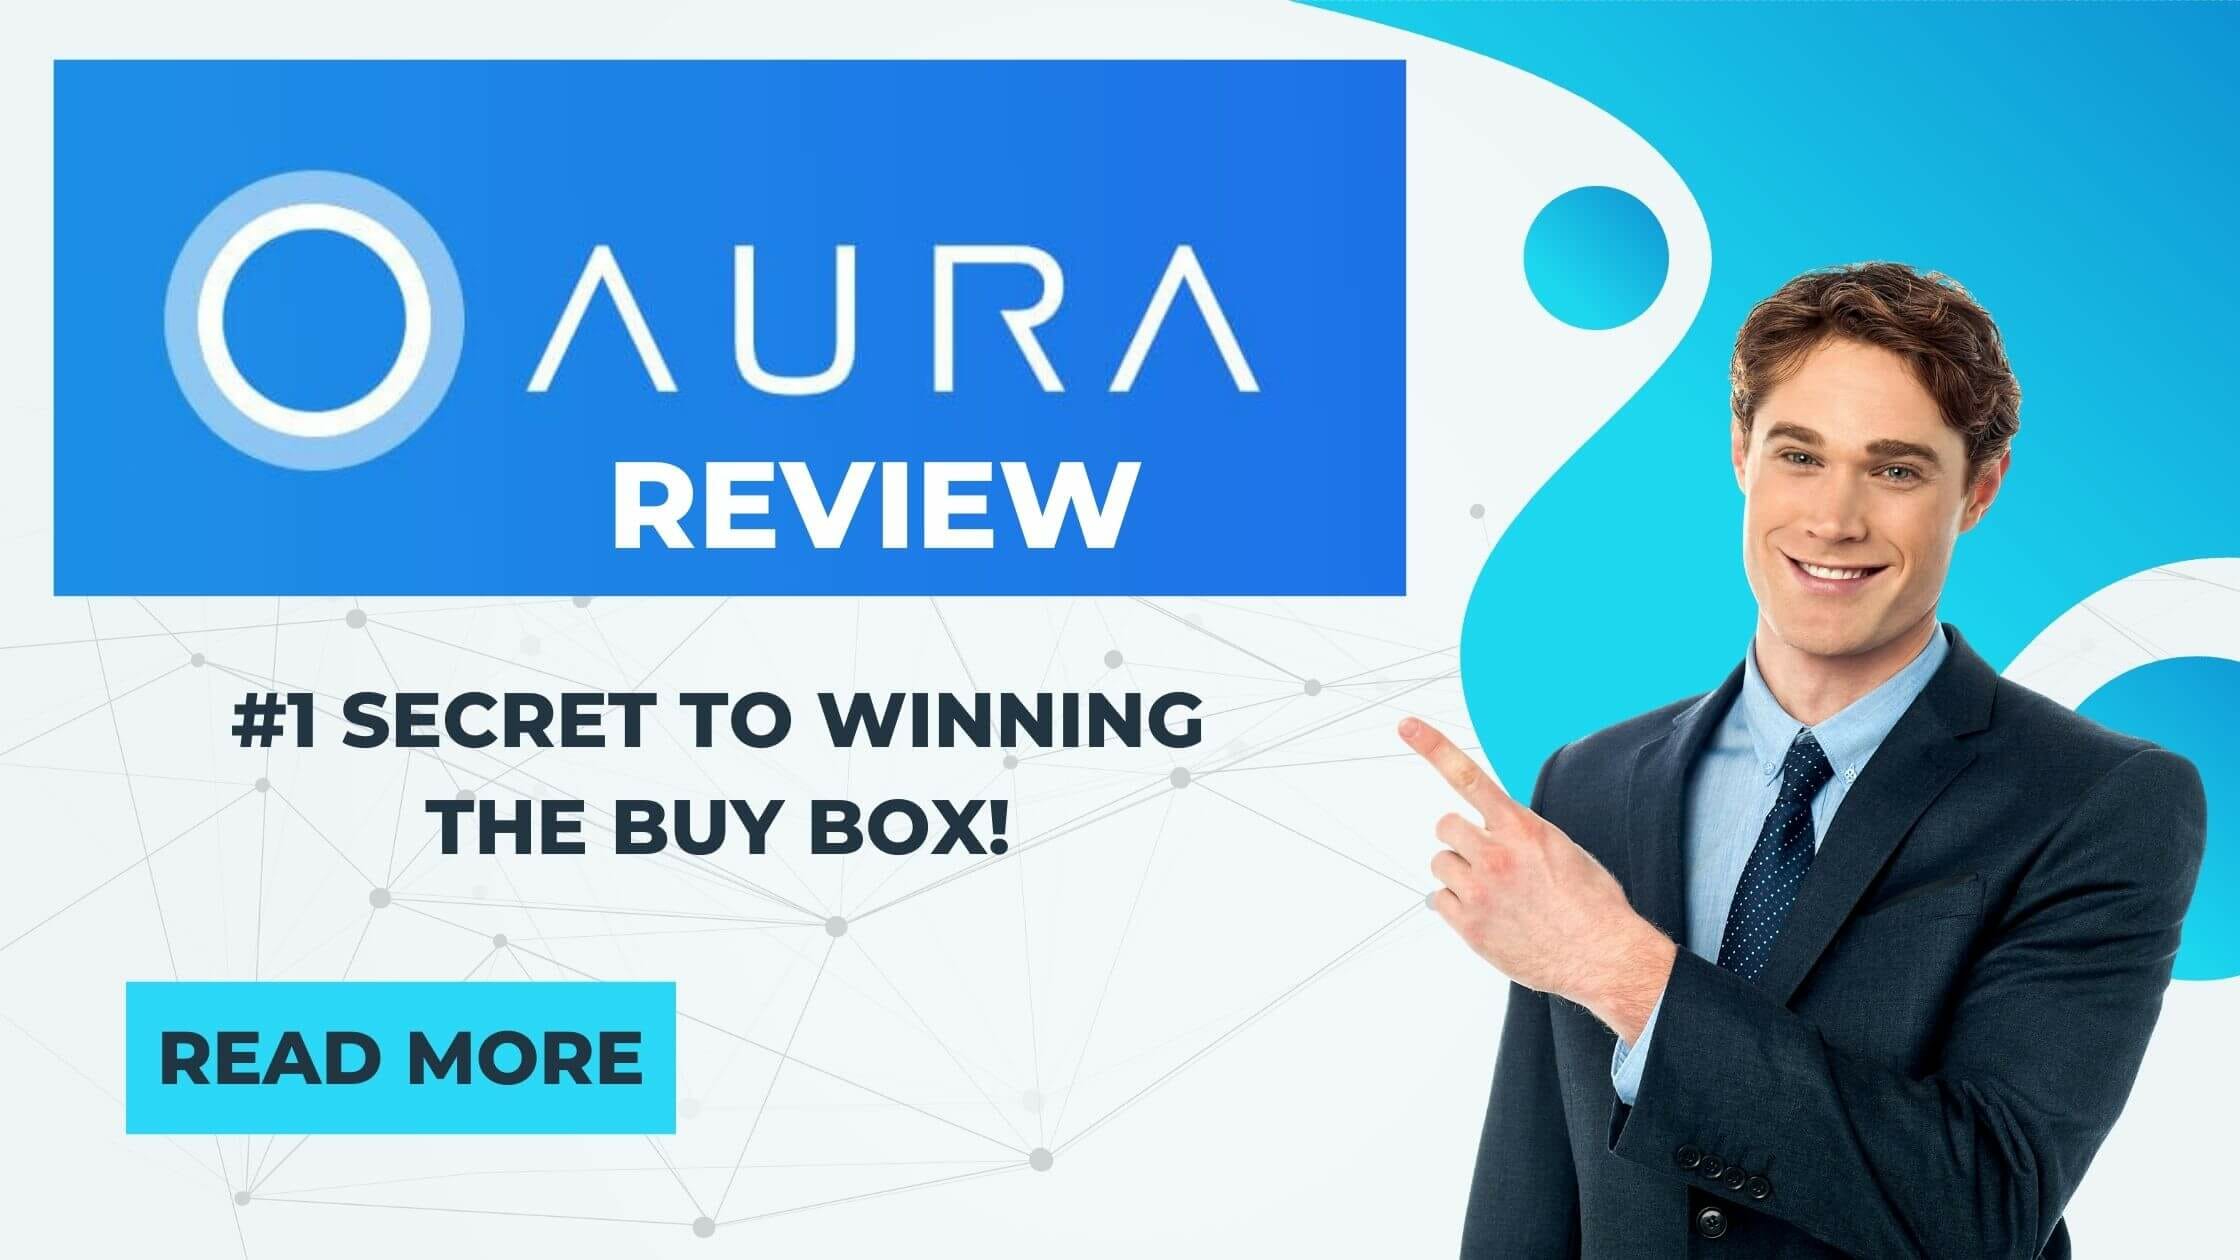 Winning the buy box with aura repricing review